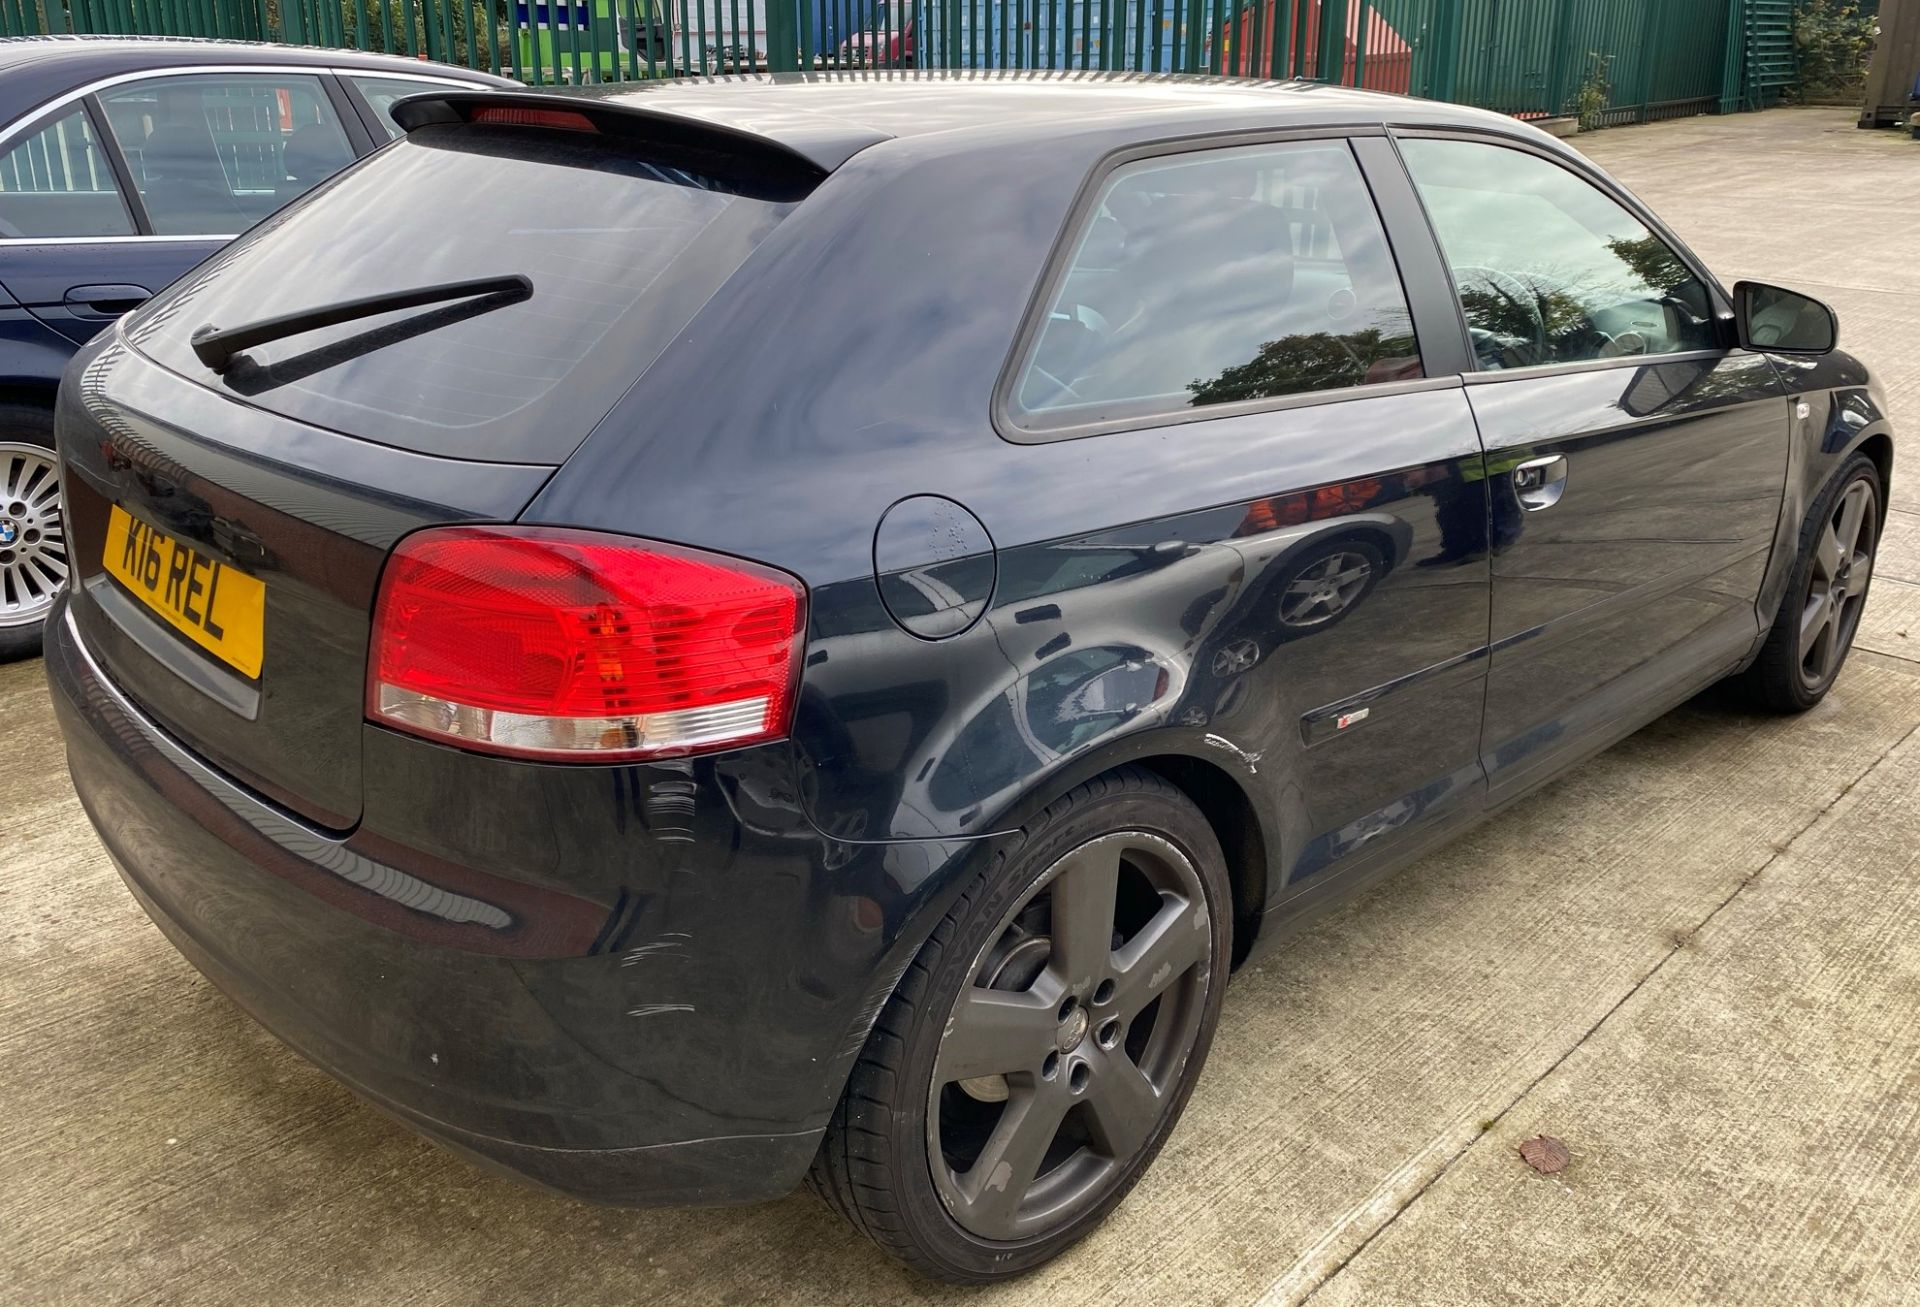 SEIZED VEHICLE: AUDI A3 S LINE 3 DOOR COUPE - diesel - black - black leather interior Reg No: Not - Image 4 of 9